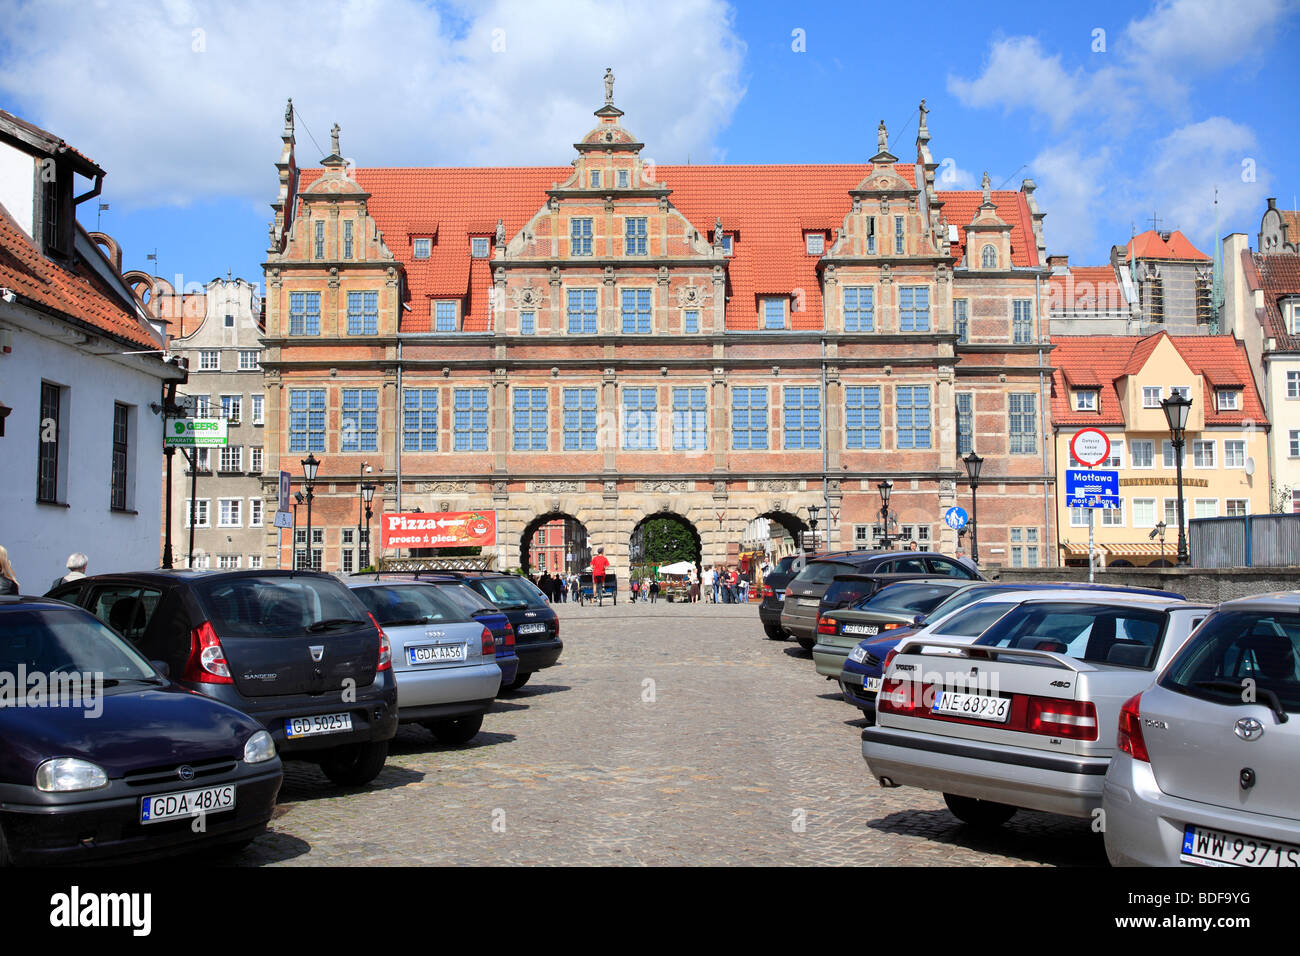 parking lot old town infront of green gate grünes tor, gdansk poland europe Stock Photo